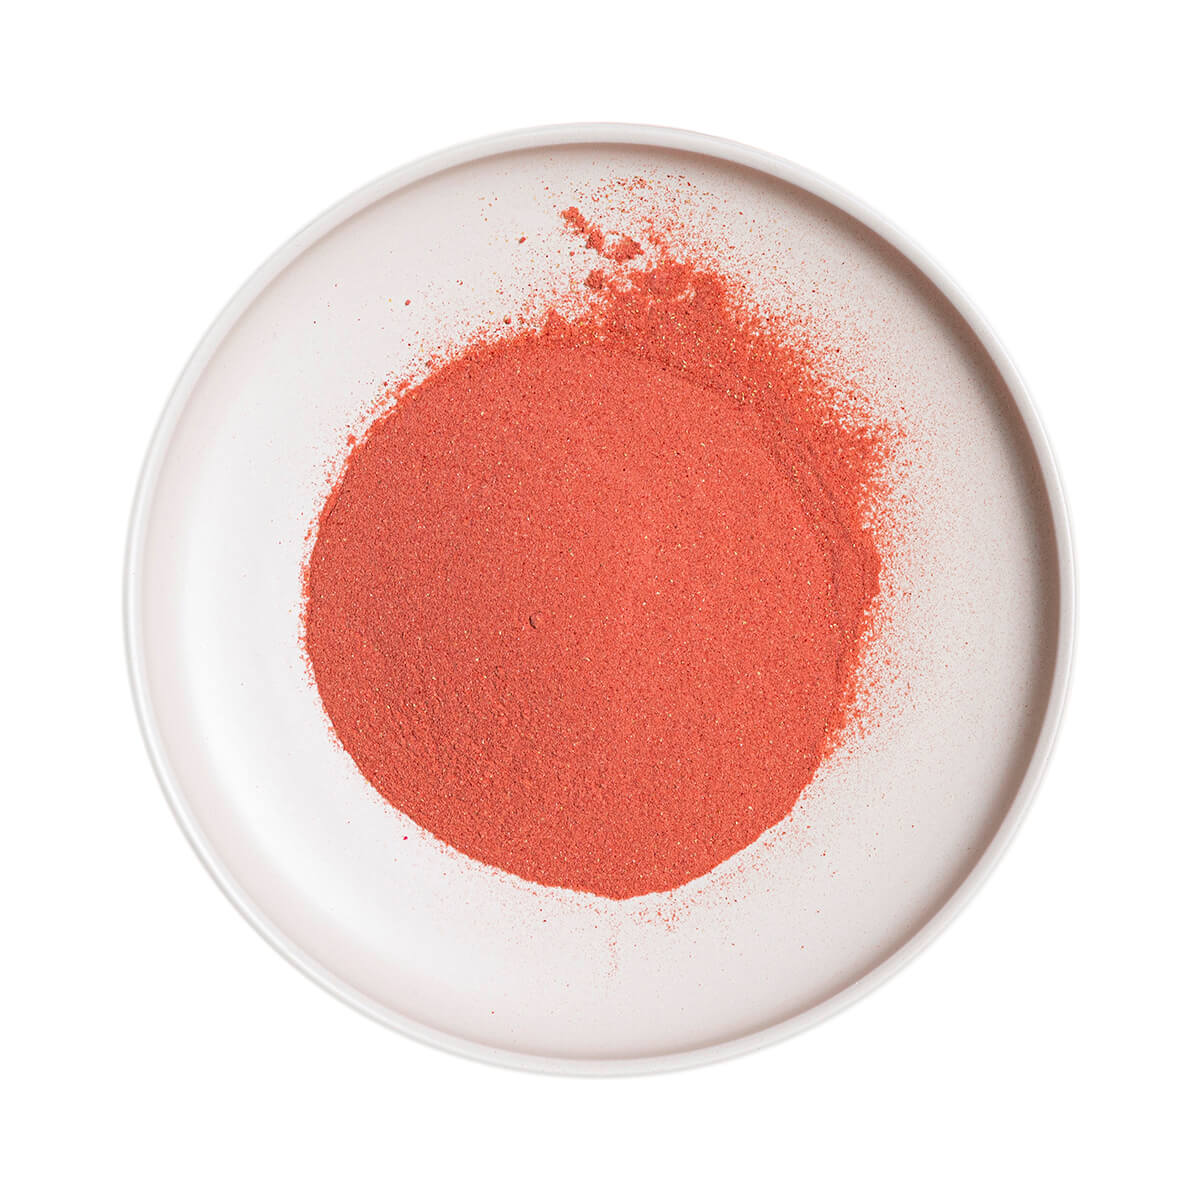 Freeze-Dried Strawberry Powder For Smoothies and Baking